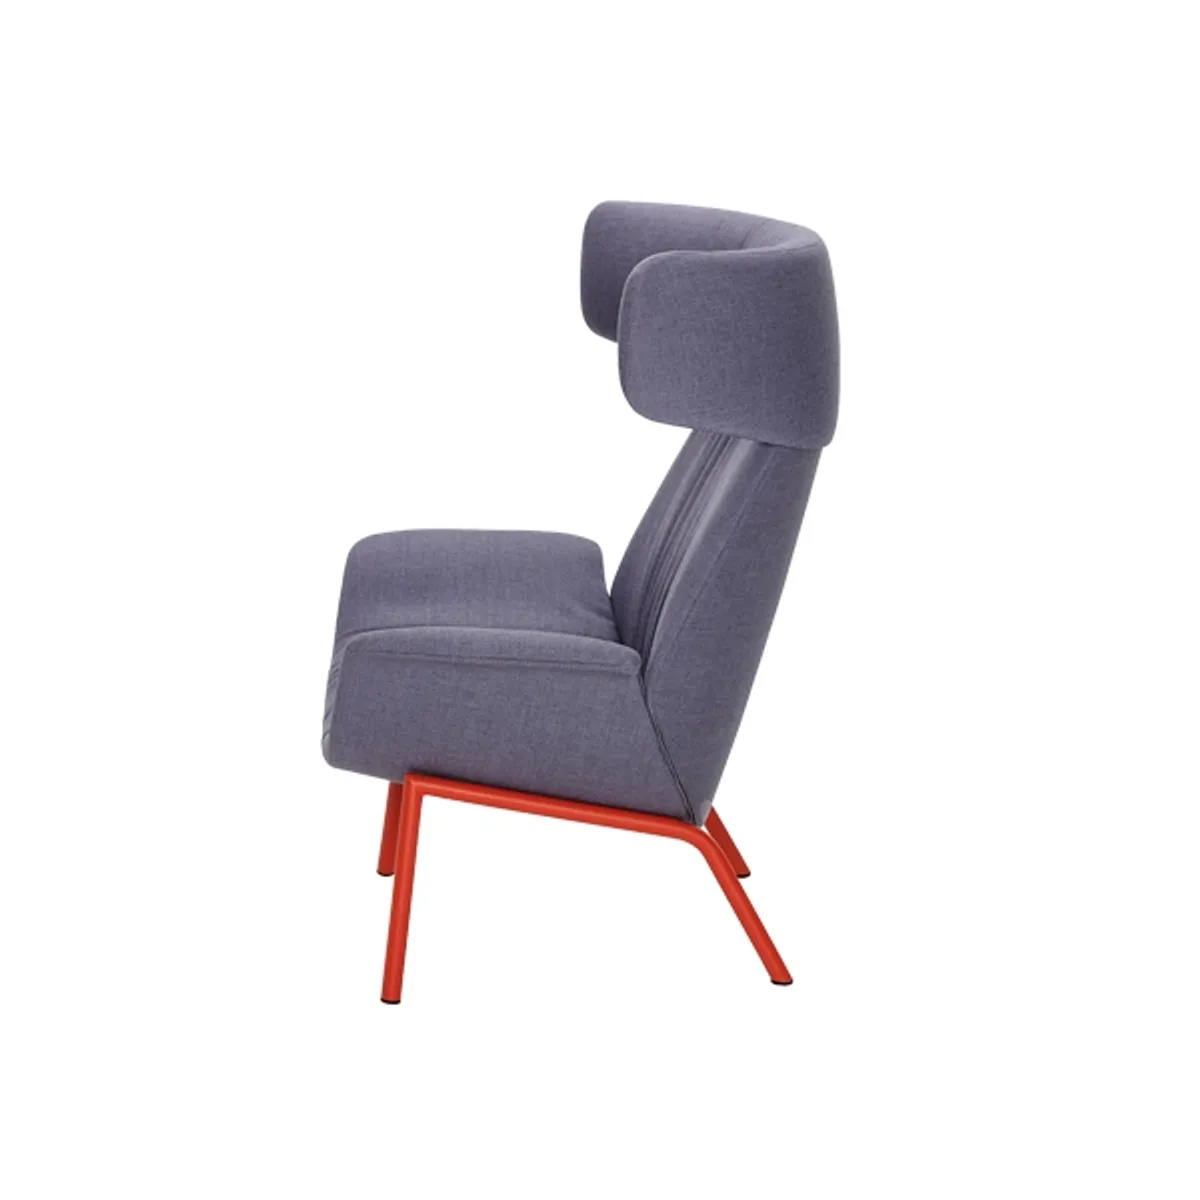 Ilawingbackloungechair Inside Out Contracts2